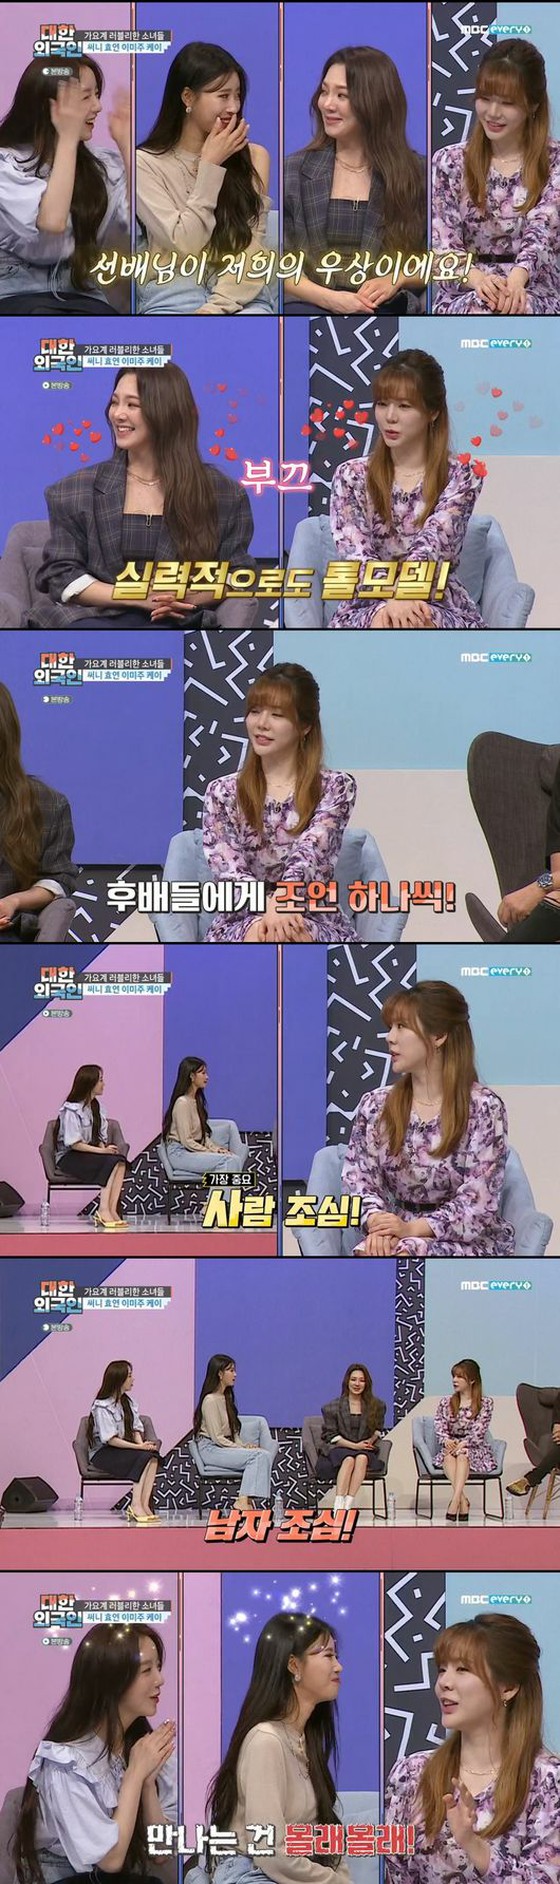 Sunny of "SNSD (Girls' Generation)" gave an advice to her juniors "LOVELYZ" "Watch out for men! Meet them secretly"